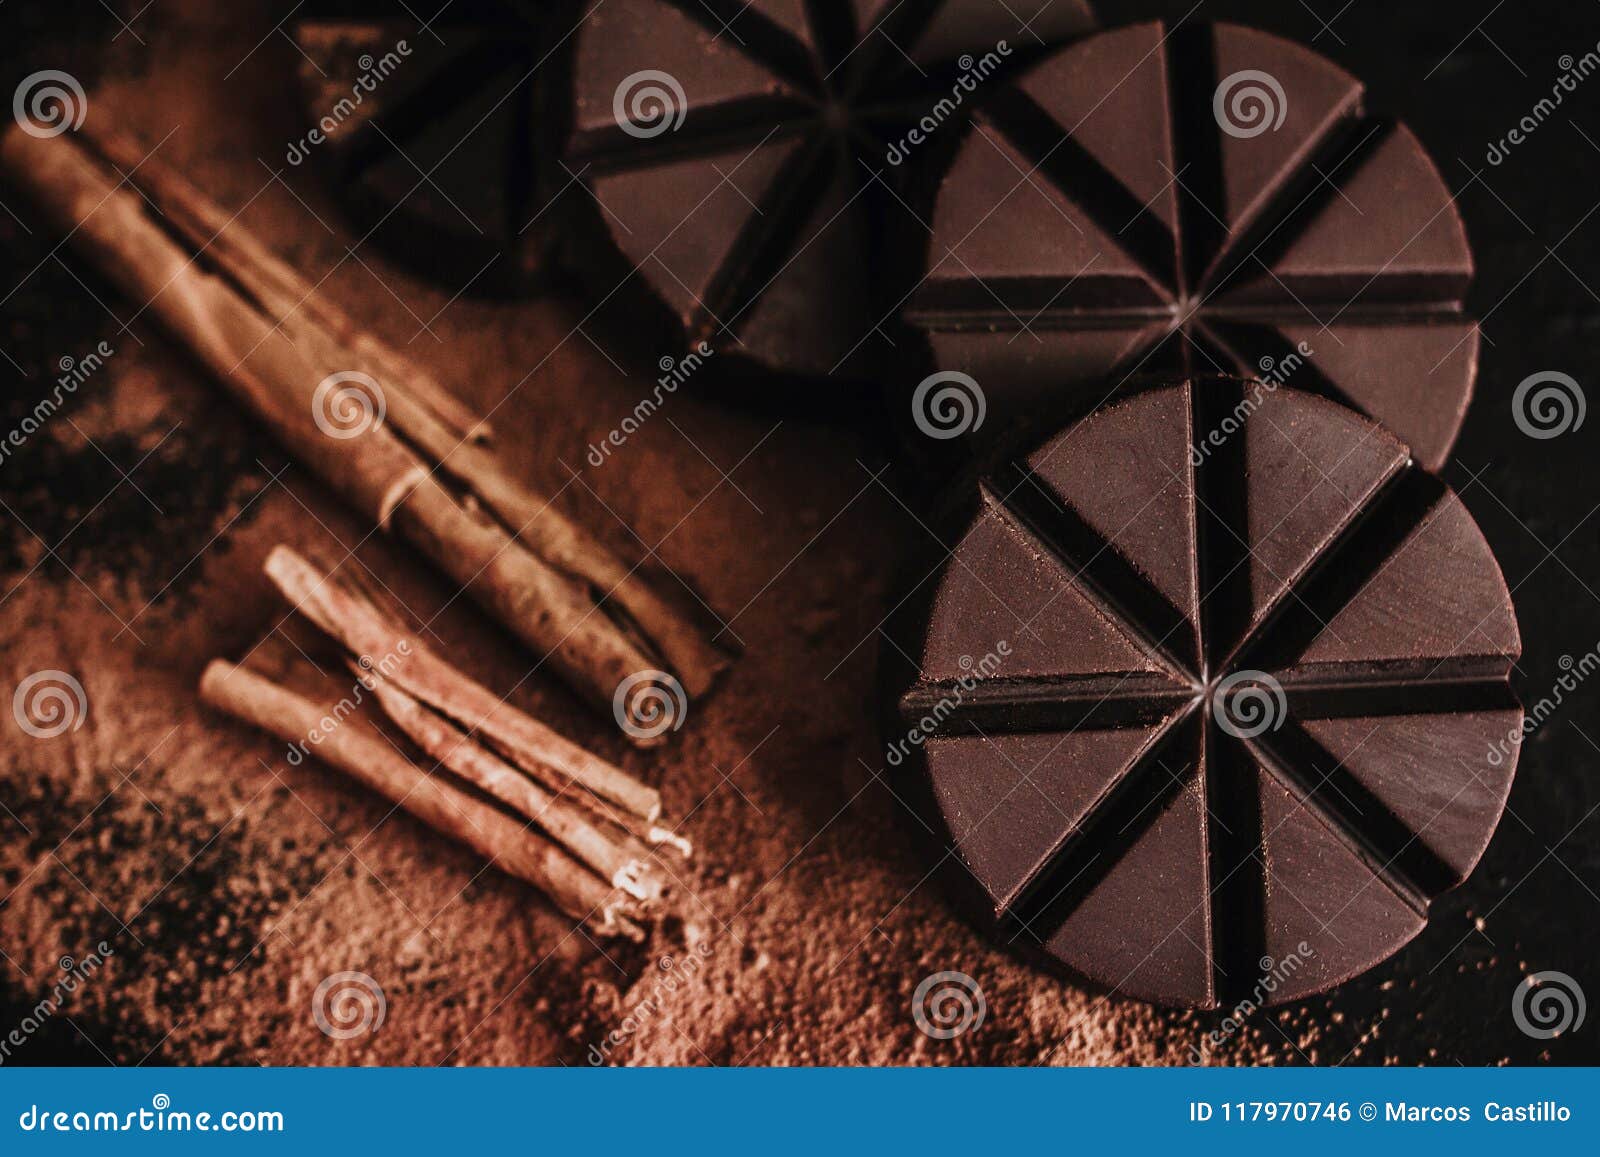 chocolate mexicano, cinnamon sticks and mexican chocolate from oaxaca mexico on wooden in rustic style